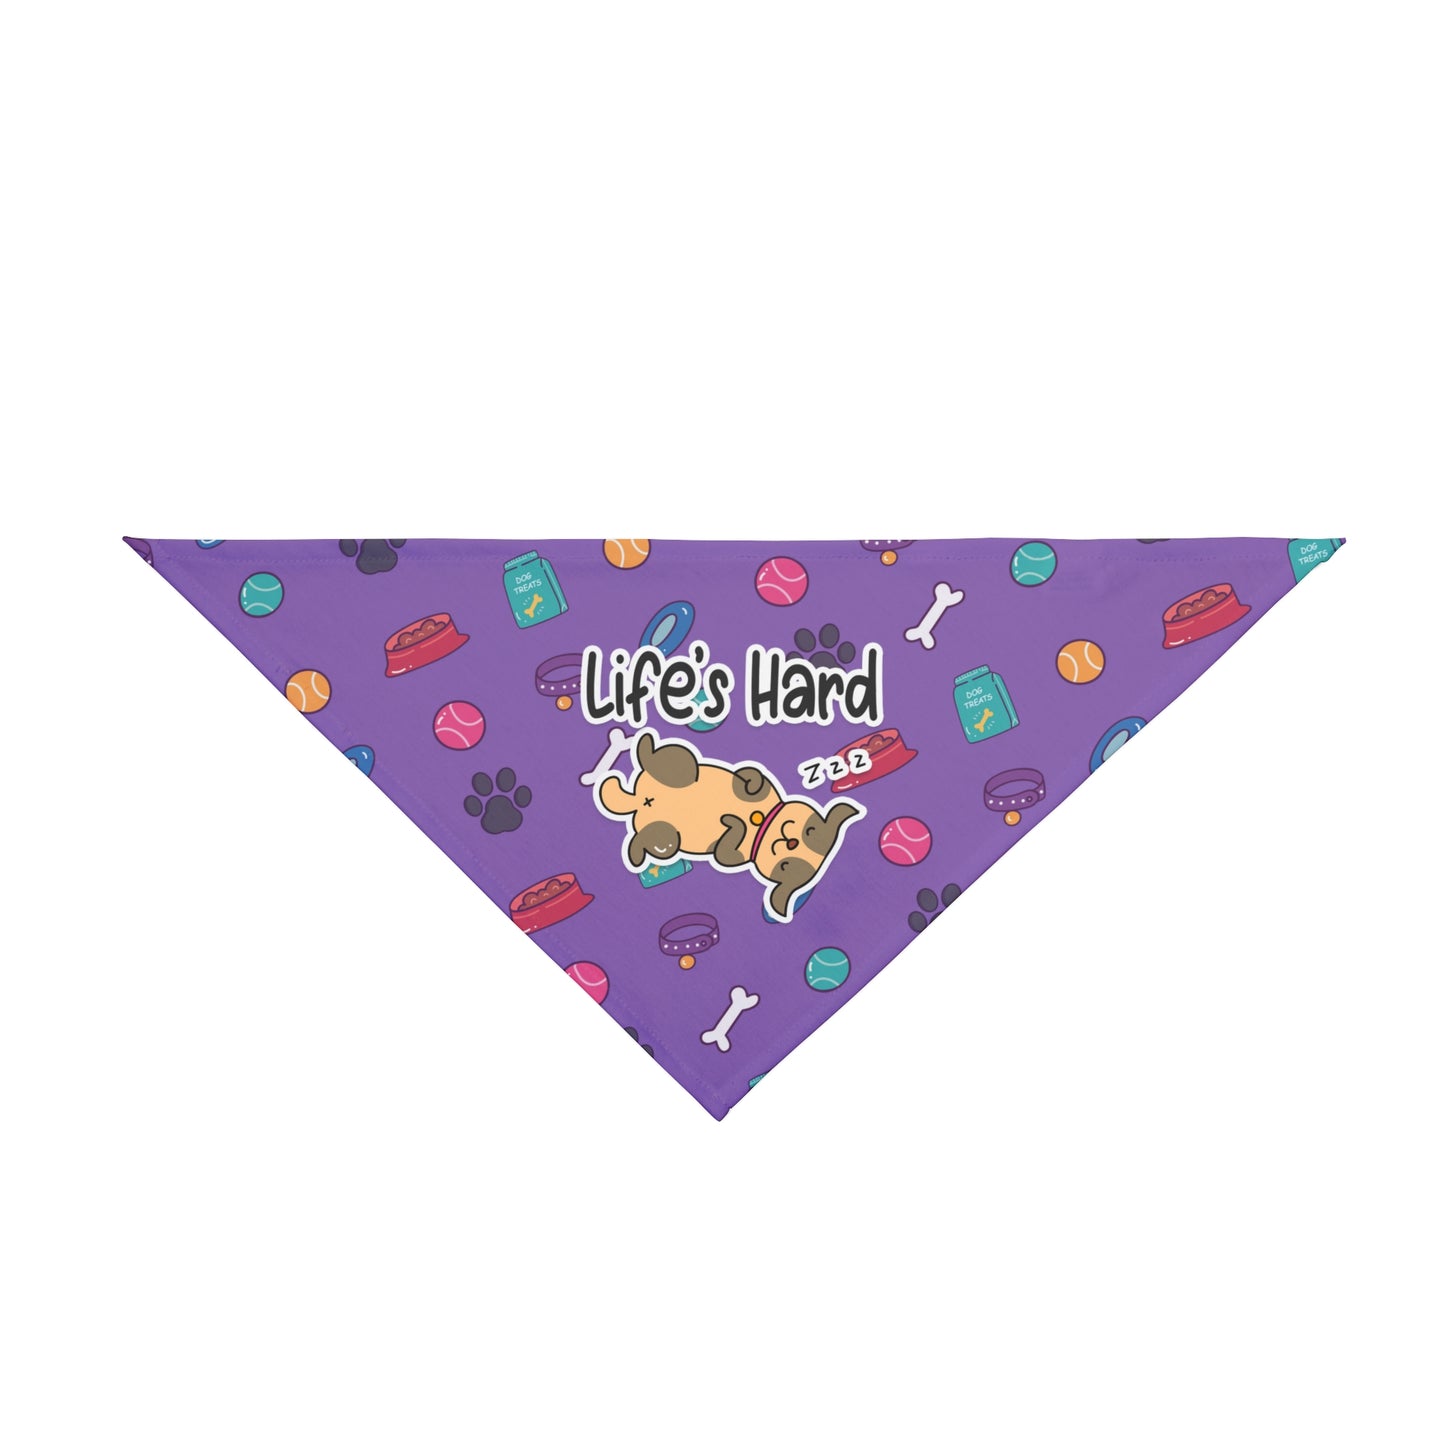 A pet bandana with a beautiful pattern design featuring all things dog love. A smiling dog sleeping below a message that says "Life's hard". Bandana's Color is purple